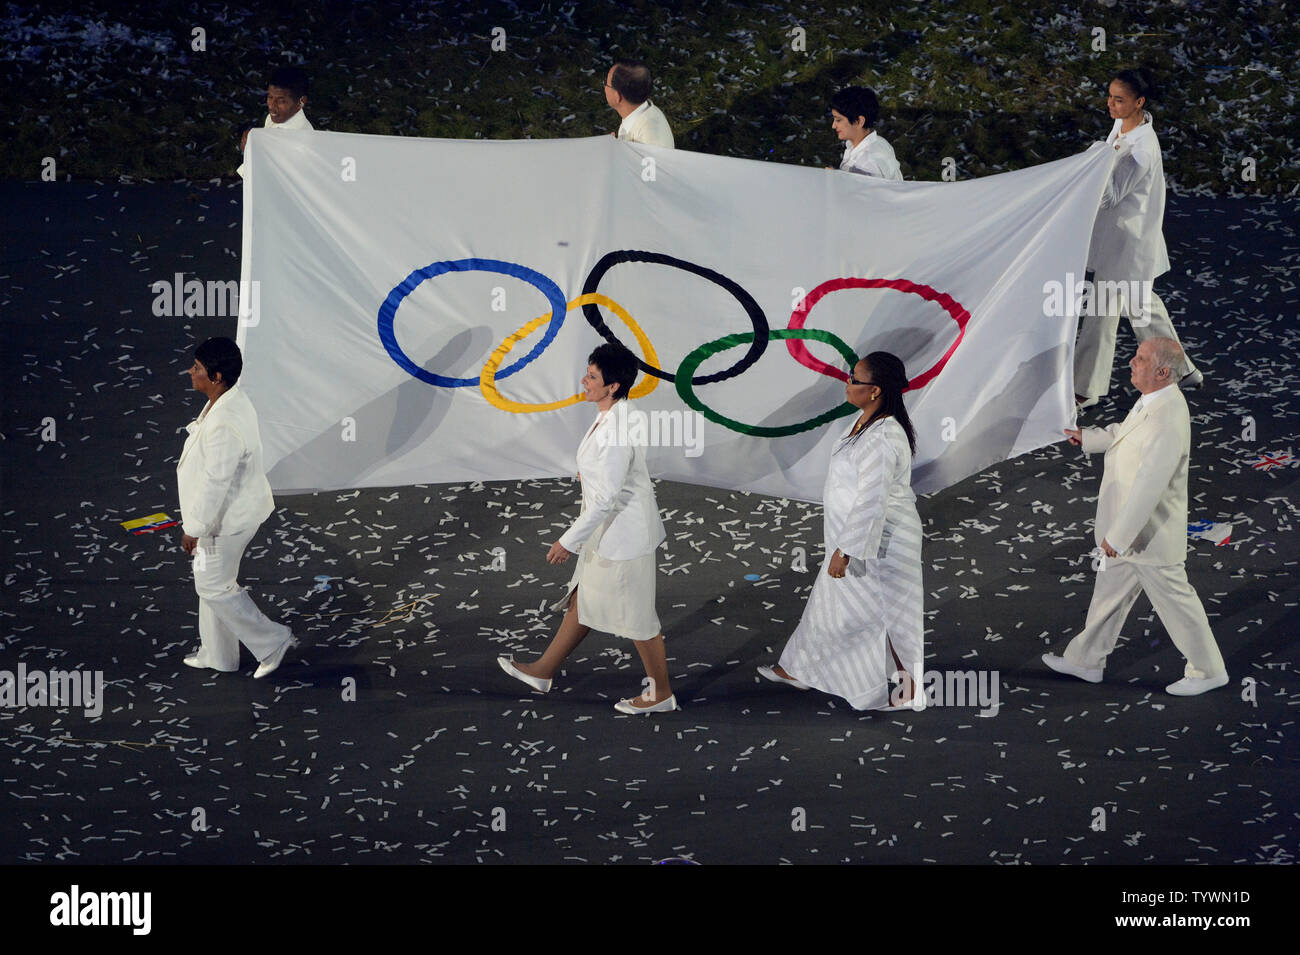 The Olympic flag enters the Olympic stadium during the Opening Ceremony of the London 2012 Summer Olympics on July 27, 2012 in Stratford, London.  UPI/Pat Benic Stock Photo